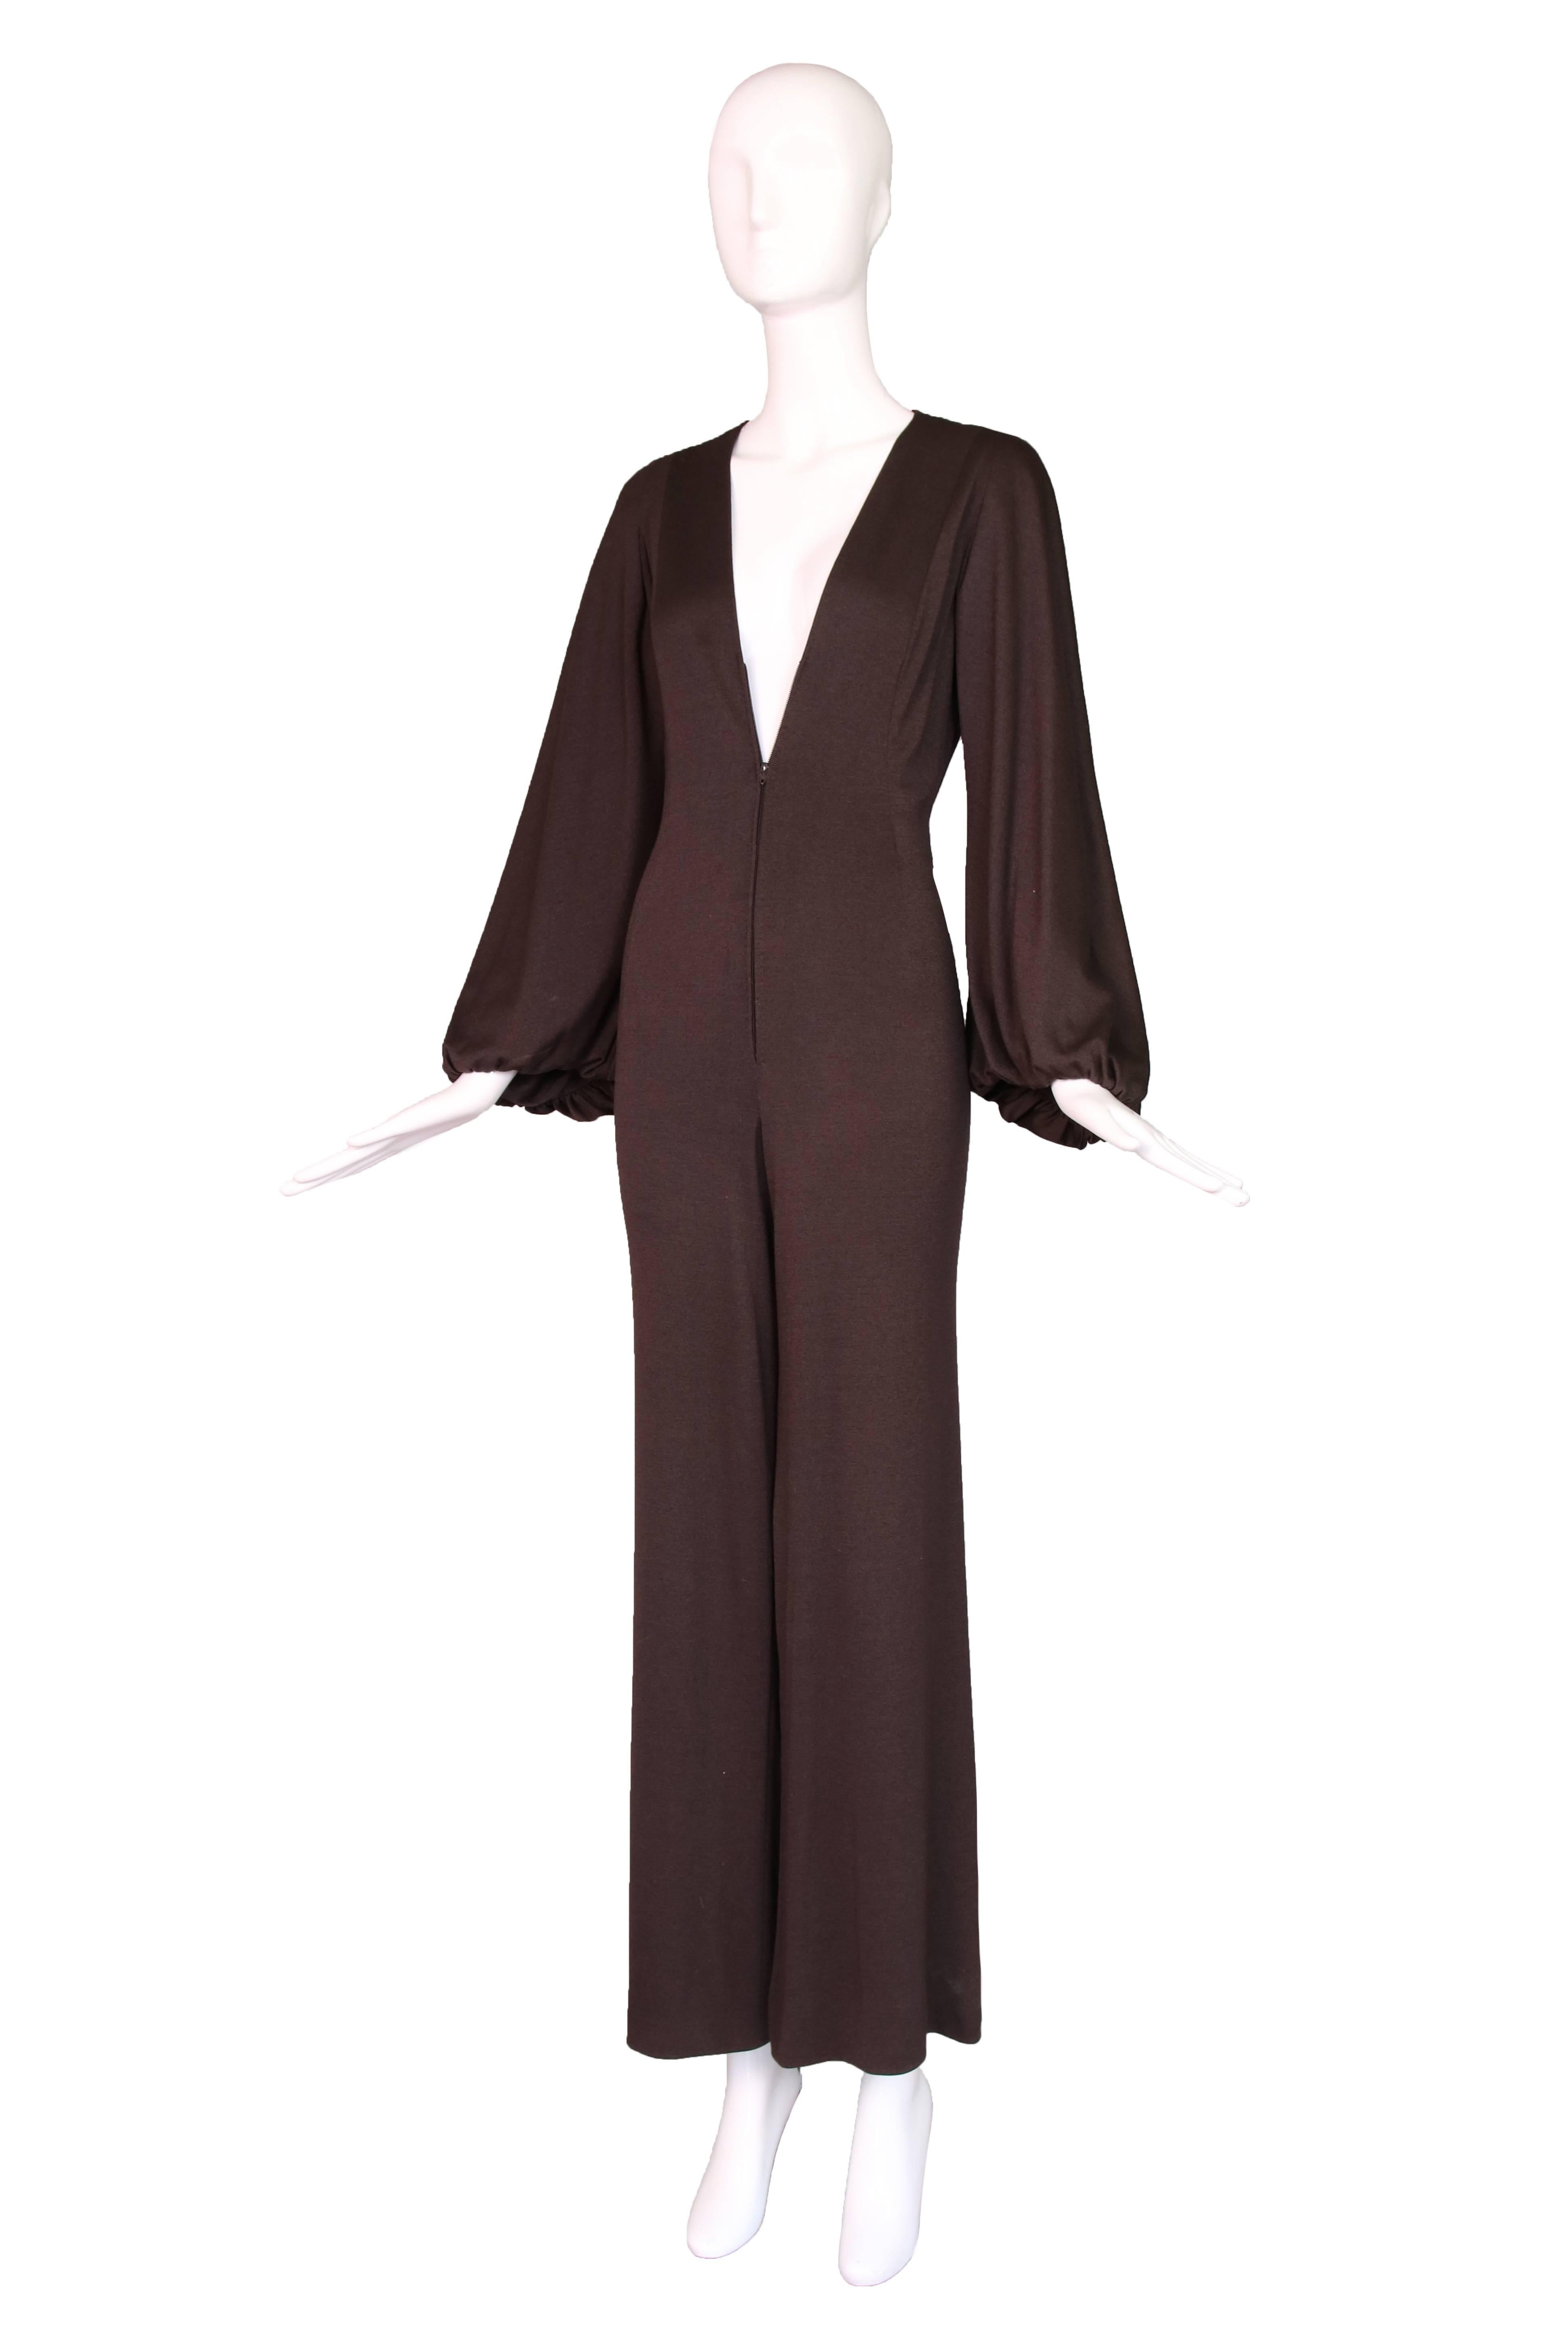 1970's Pauline Trigere brown medium-weight wool jersey jumpsuit with double-faced bell sleeves, pants that drape/flare below the knee and a frontal bodice zipper closure that intersects that a deep V-neckline. In very good to excellent condition -